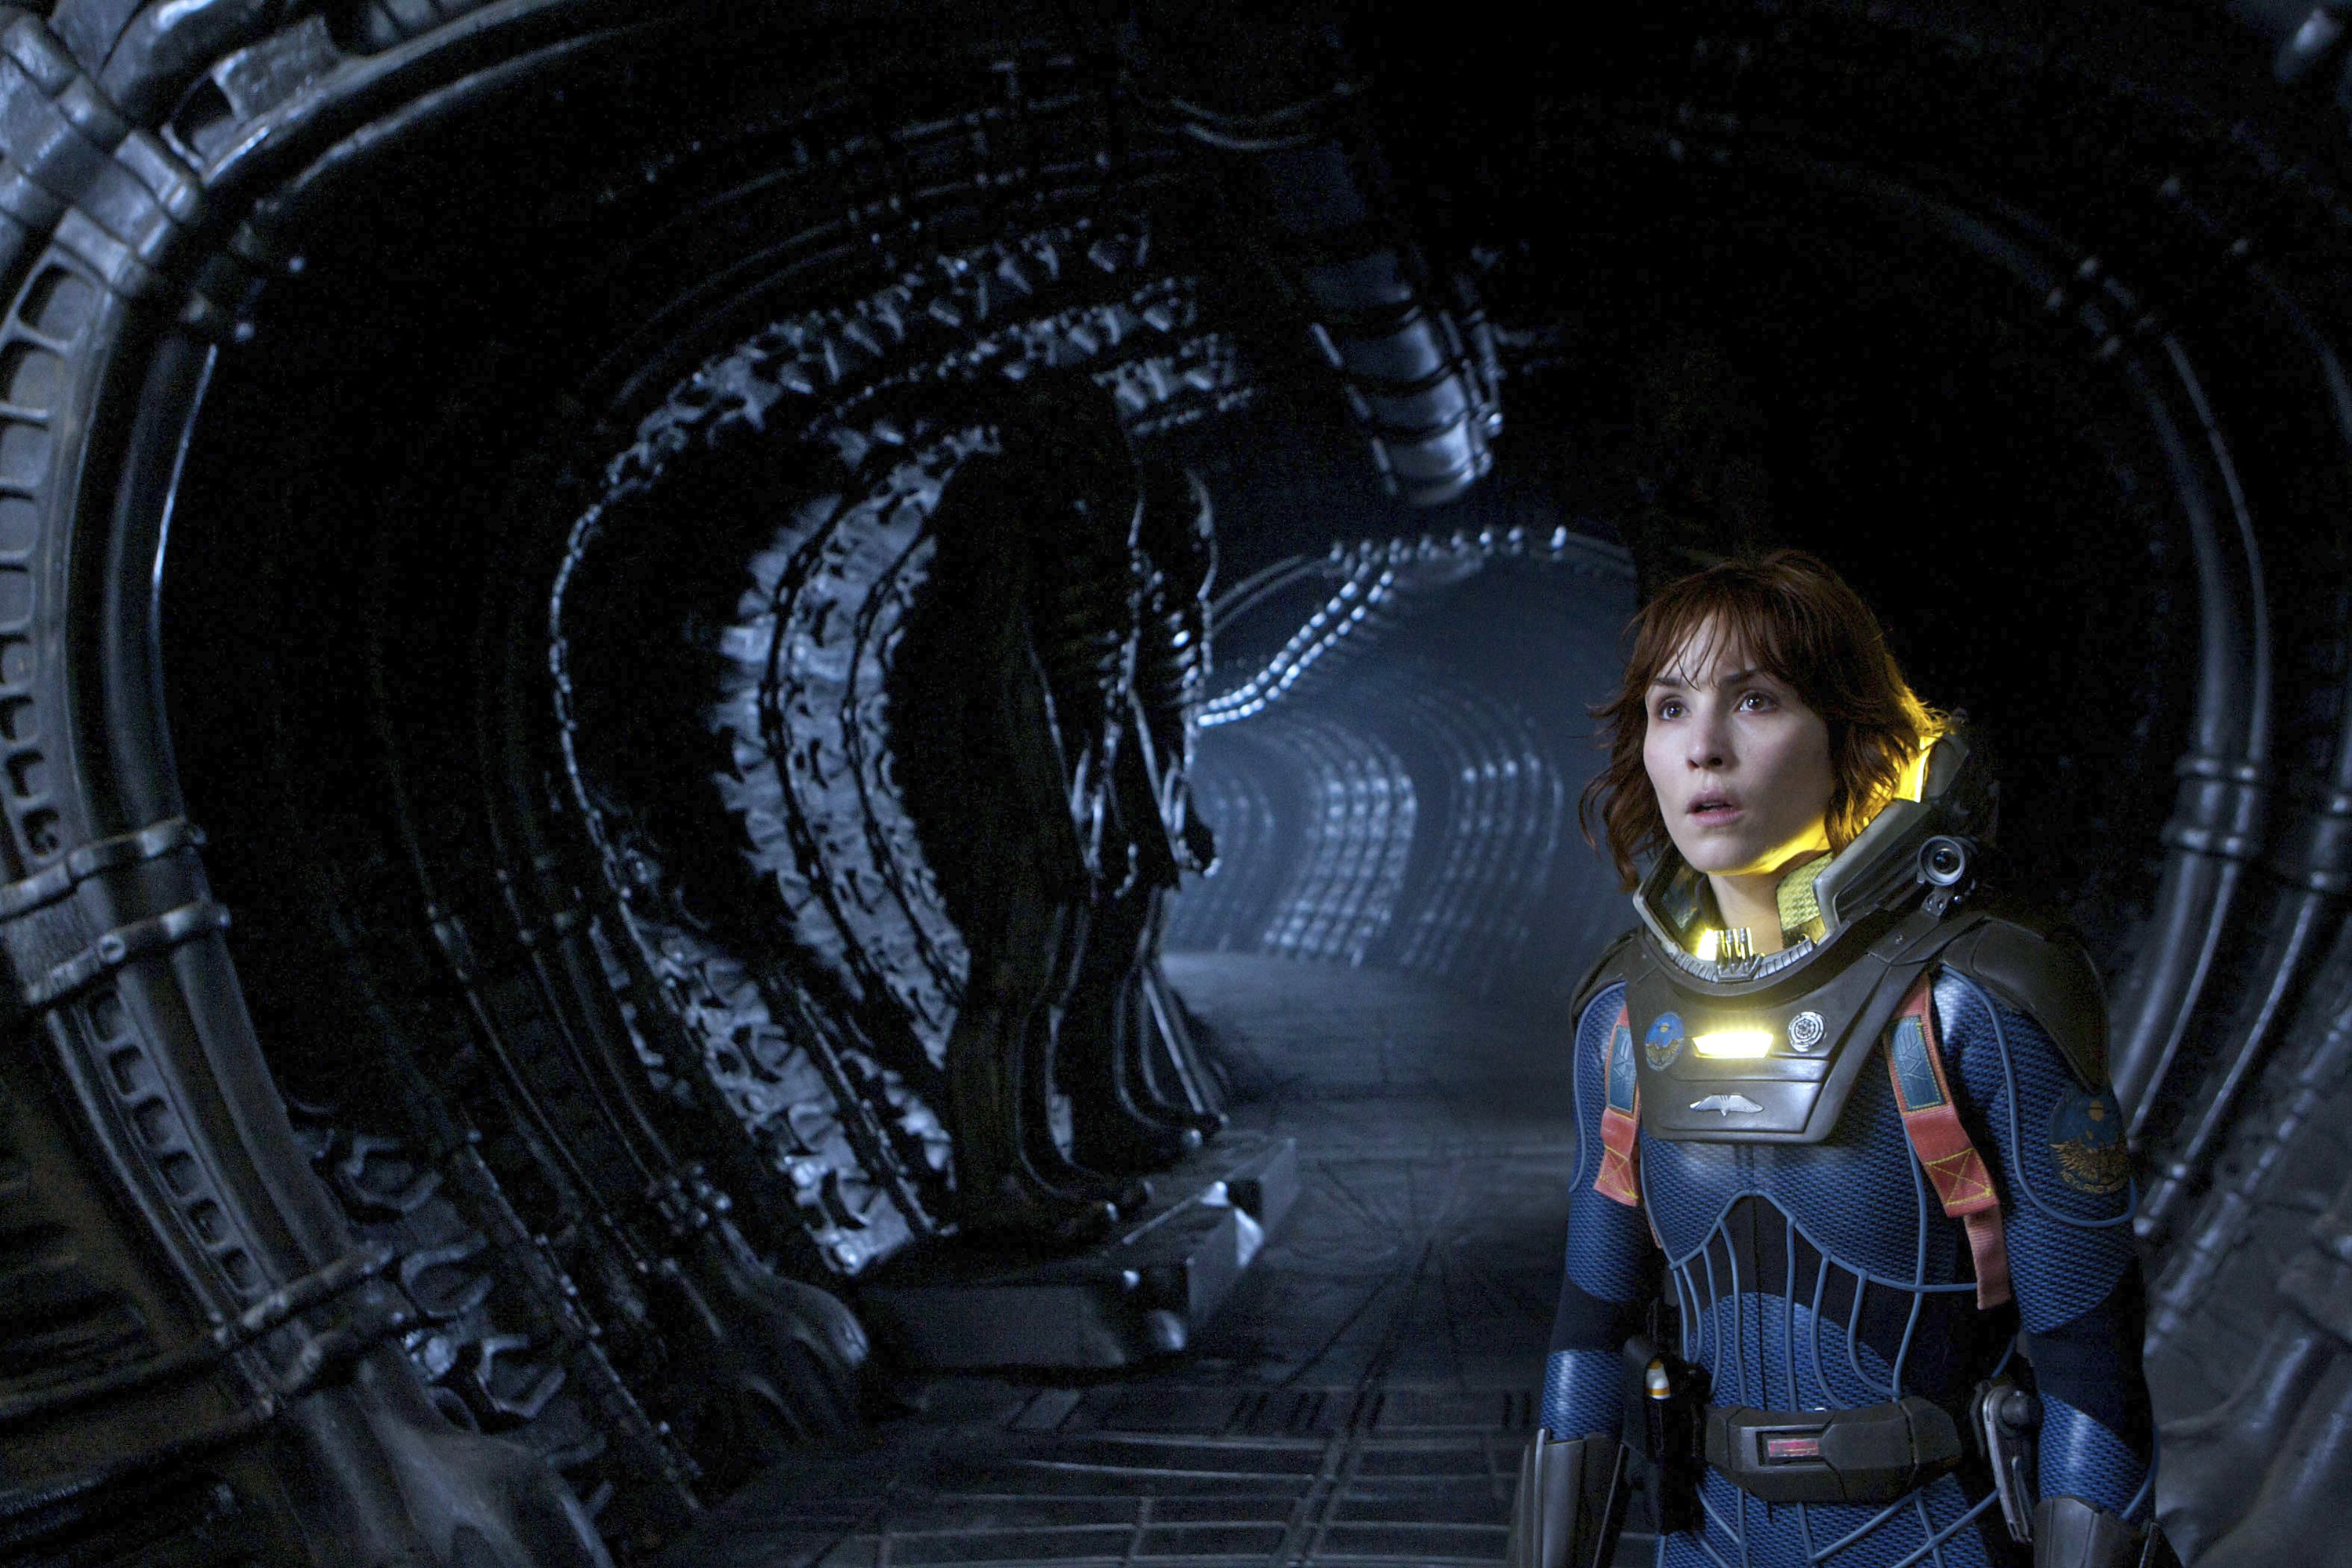 Noomi Rapace in a space suit, walking down the hallway of a dark and creepy alien ship